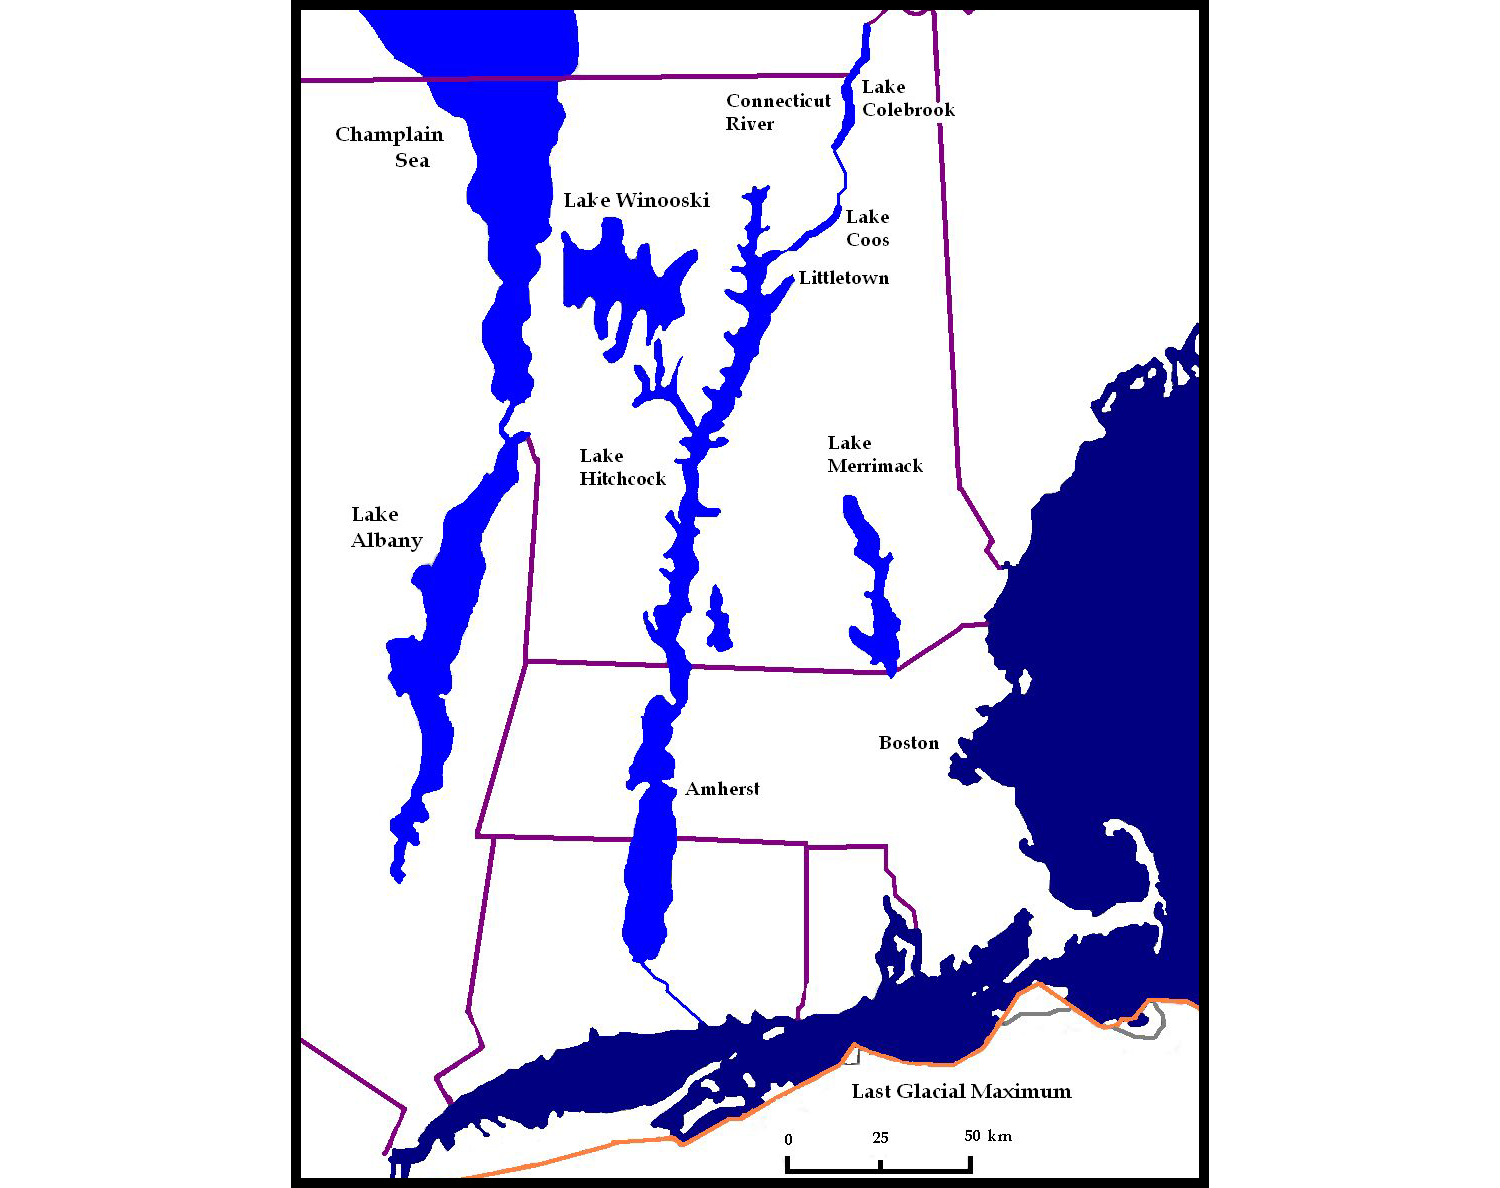 Map of eastern New York and New England showing state boundaries outlined in black. The map shows the extent of the ice sheet at the last glacial maximum using an orange line; the line extends across Long Island to south of Cape Cod. Glacial lakes are shown. These include Lake Albany in eastern New York, Lake Winooski in north-central Vermont, Lake Hitchcock extending from the Vermont-New Hampshire border to north-central Connecticut, and Lake Merrimack in southeastern New Hampshire. The southern arm of the Champlain Sea extends down the New York-Vermont border from the north.